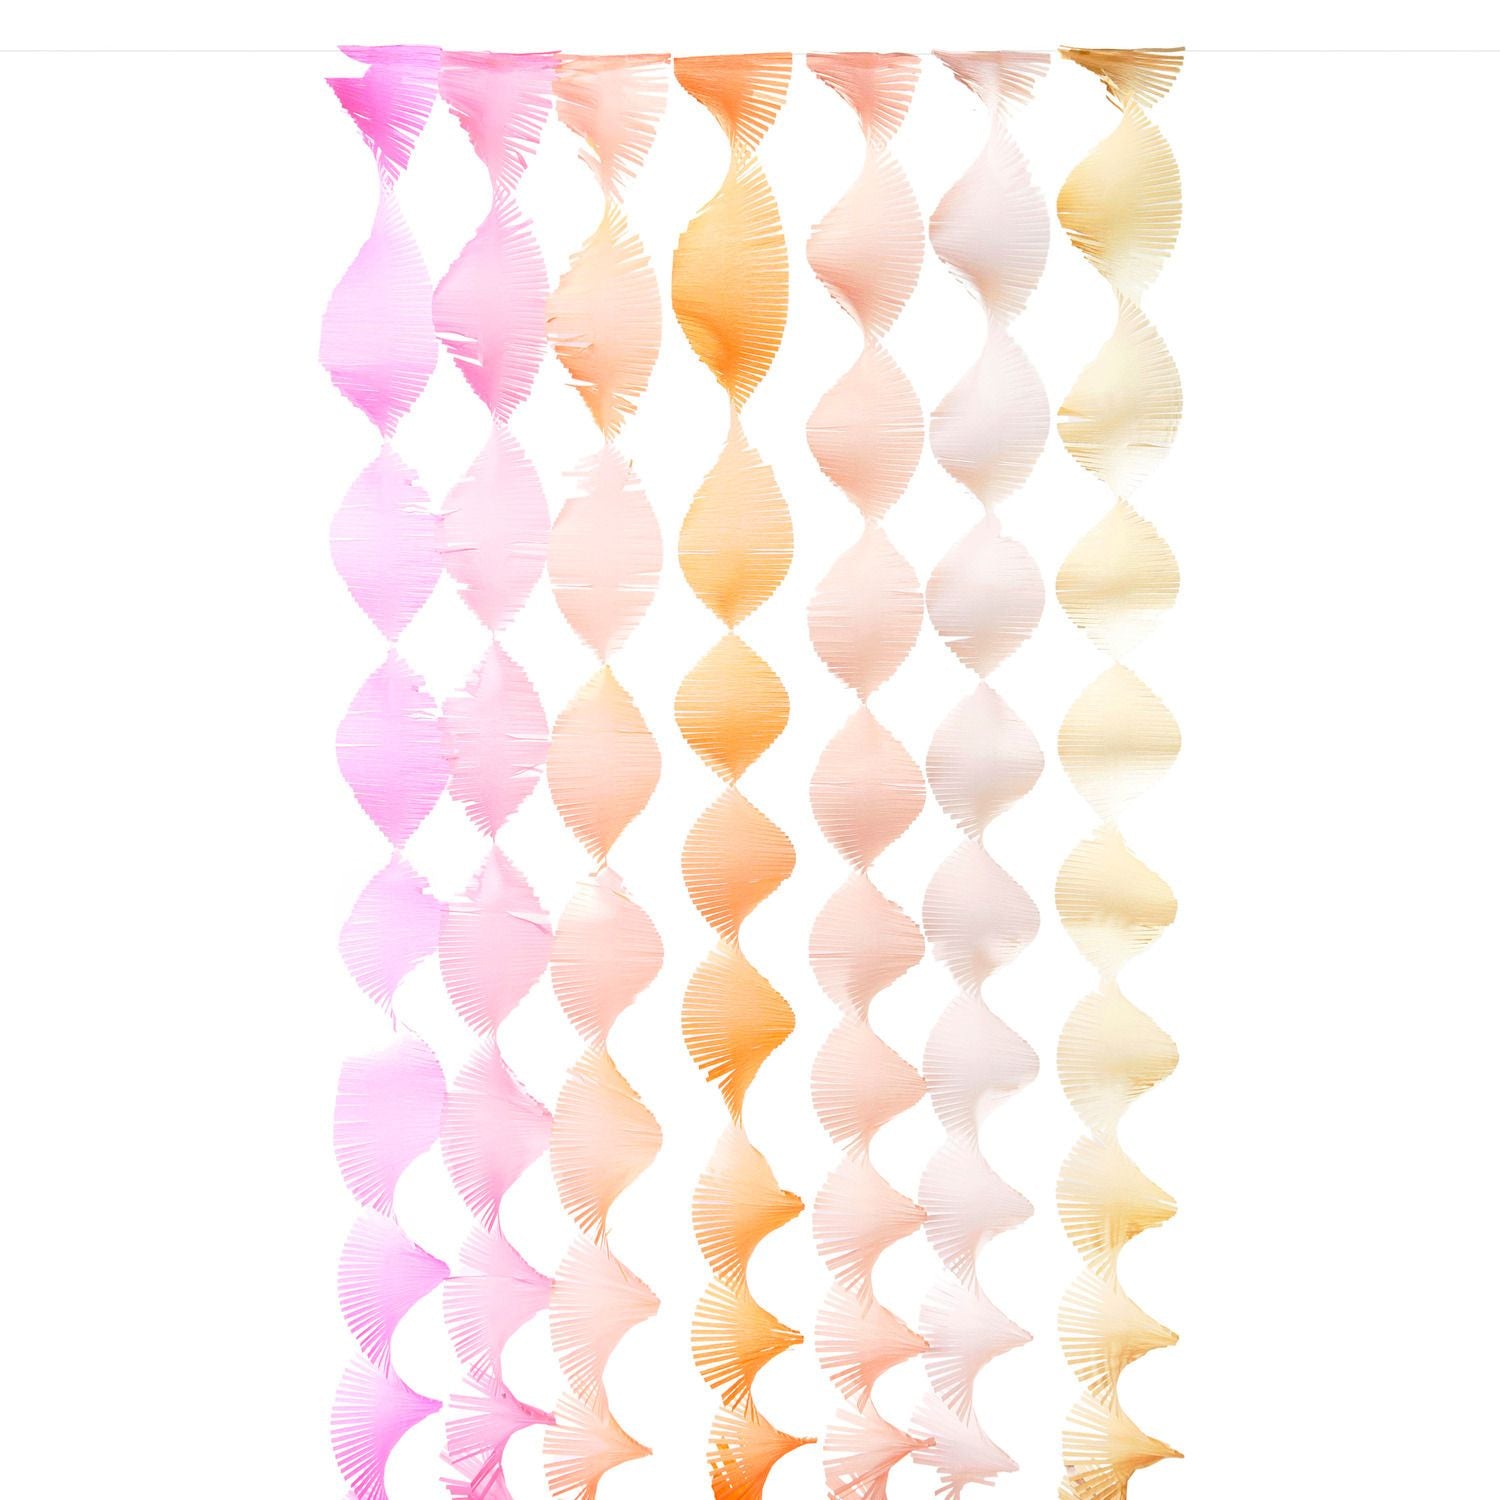 Blossom Twisty paper streamers can create beautiful ceiling decorations or a perfect party backdrop